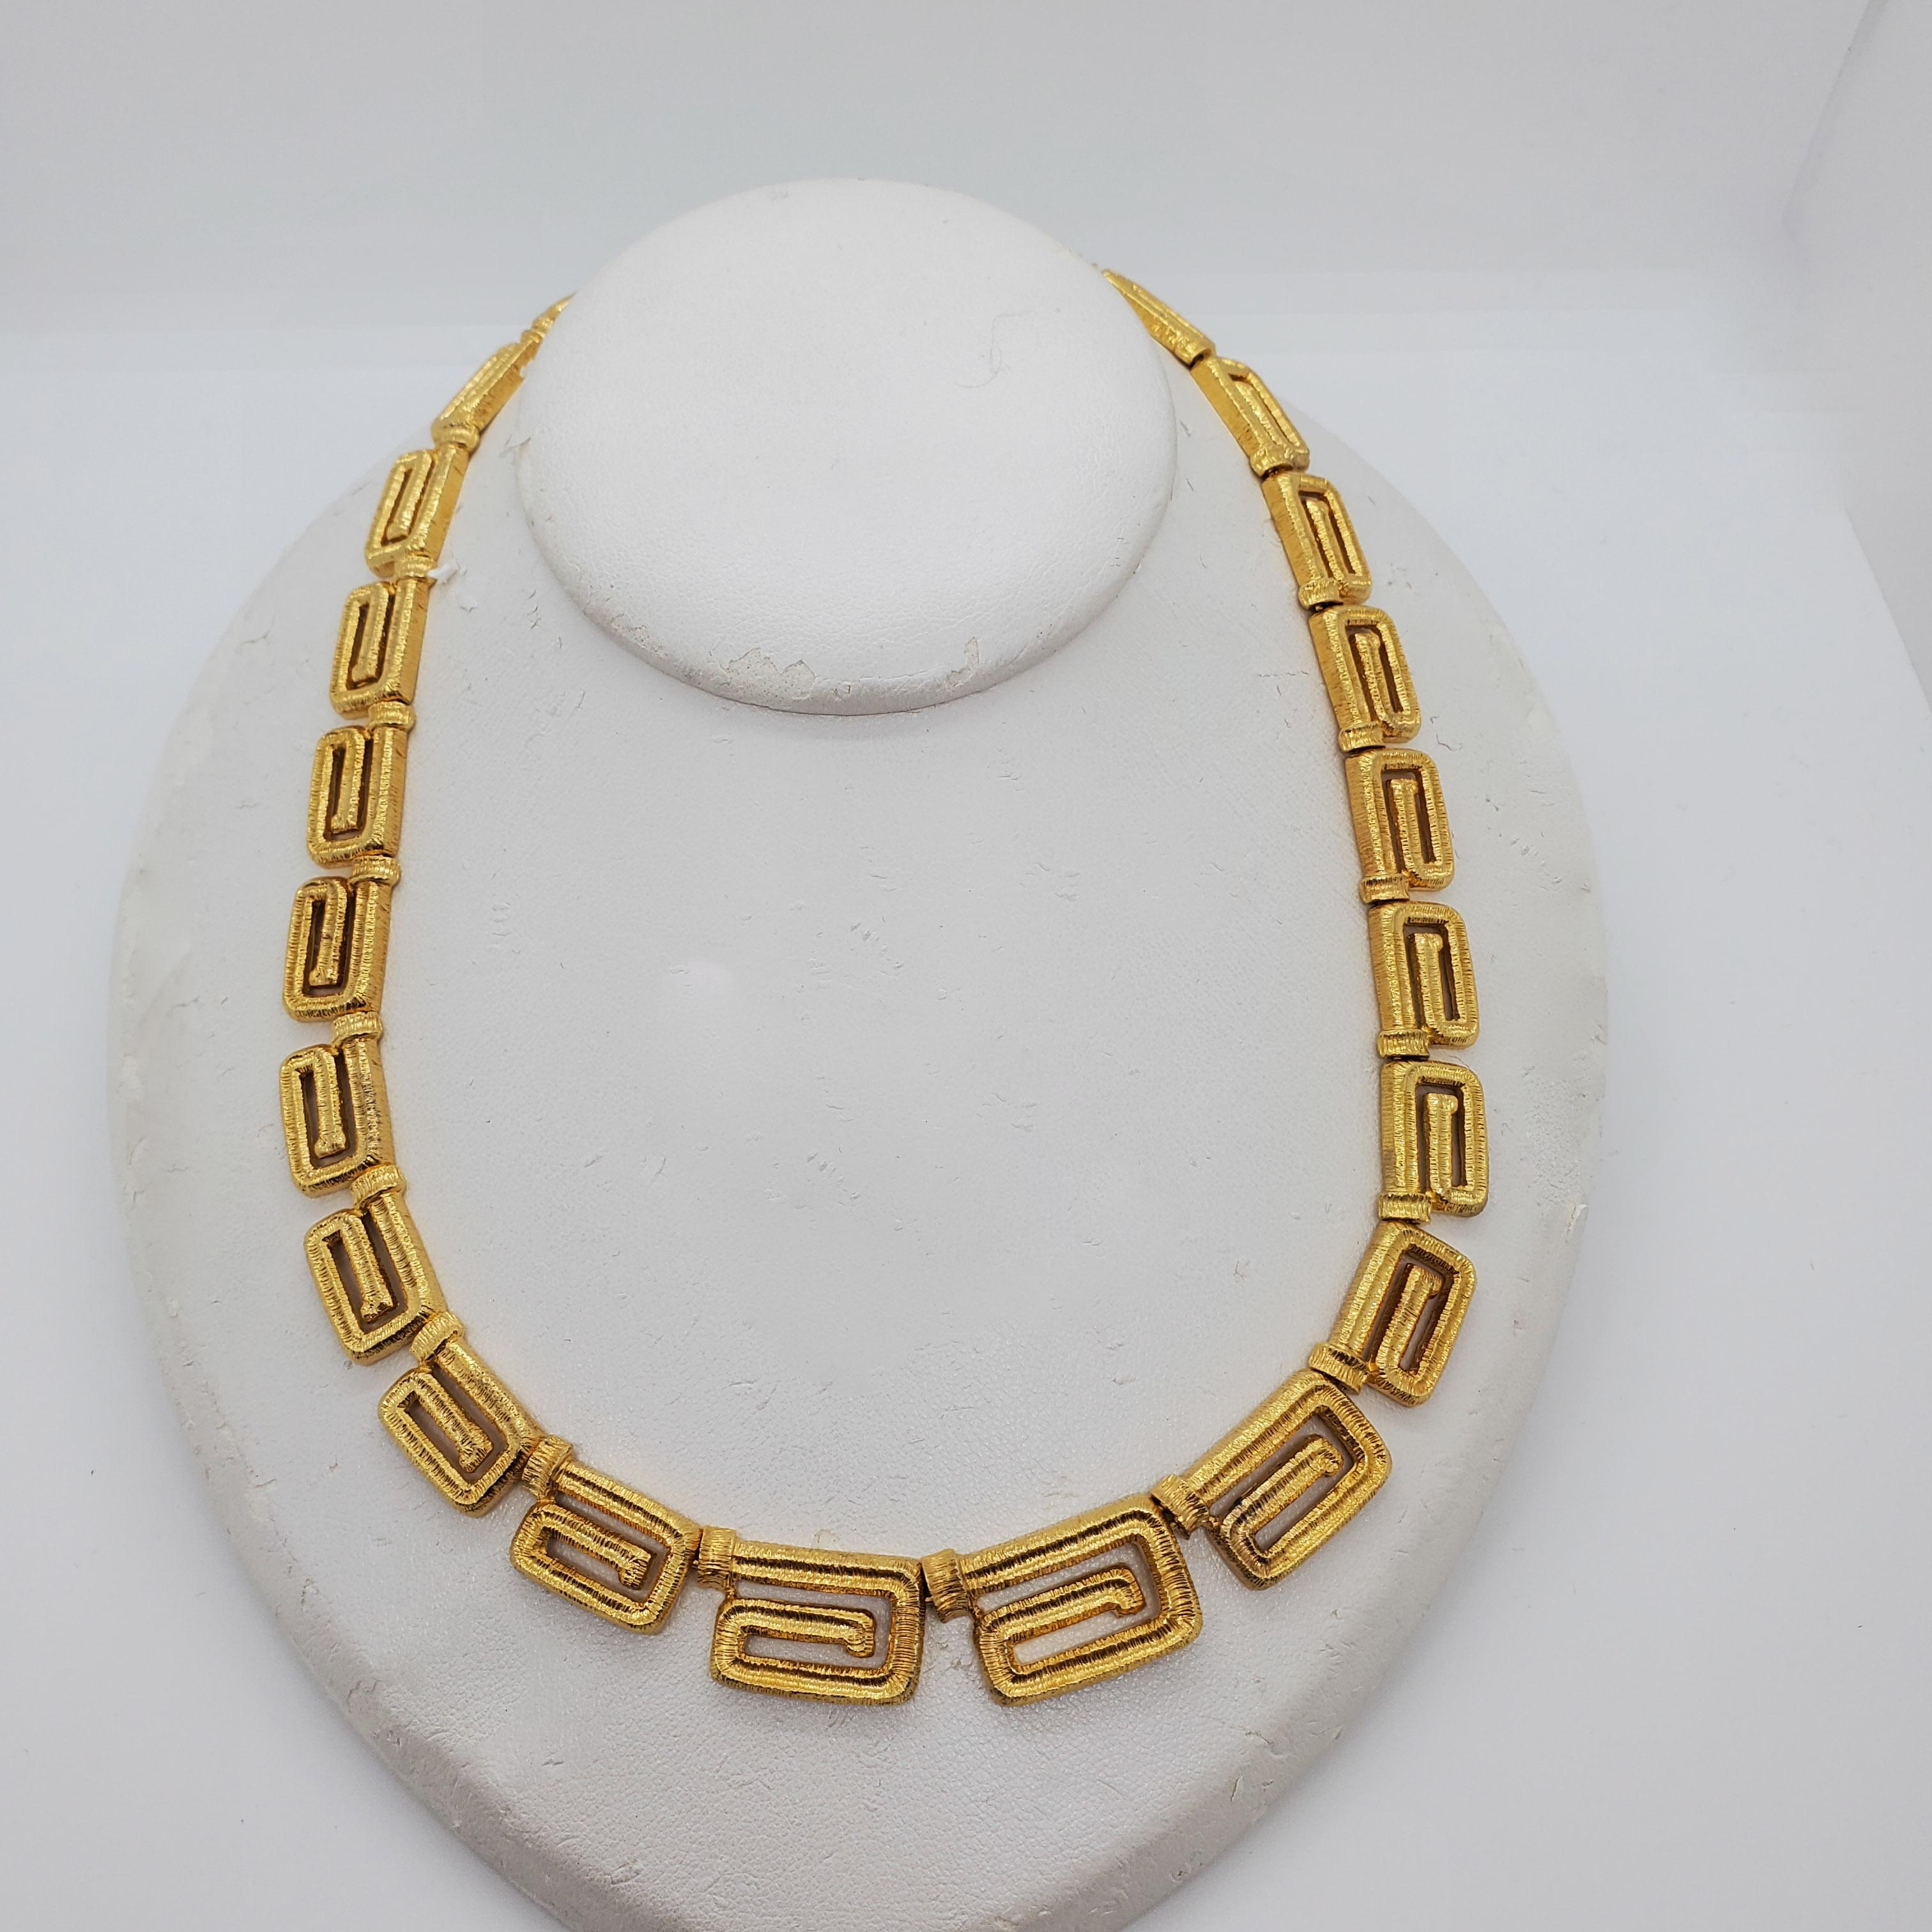 Beautiful set handmade in 18k yellow gold.  Necklace, earrings, and bracelet are all well made.  Necklace is 17